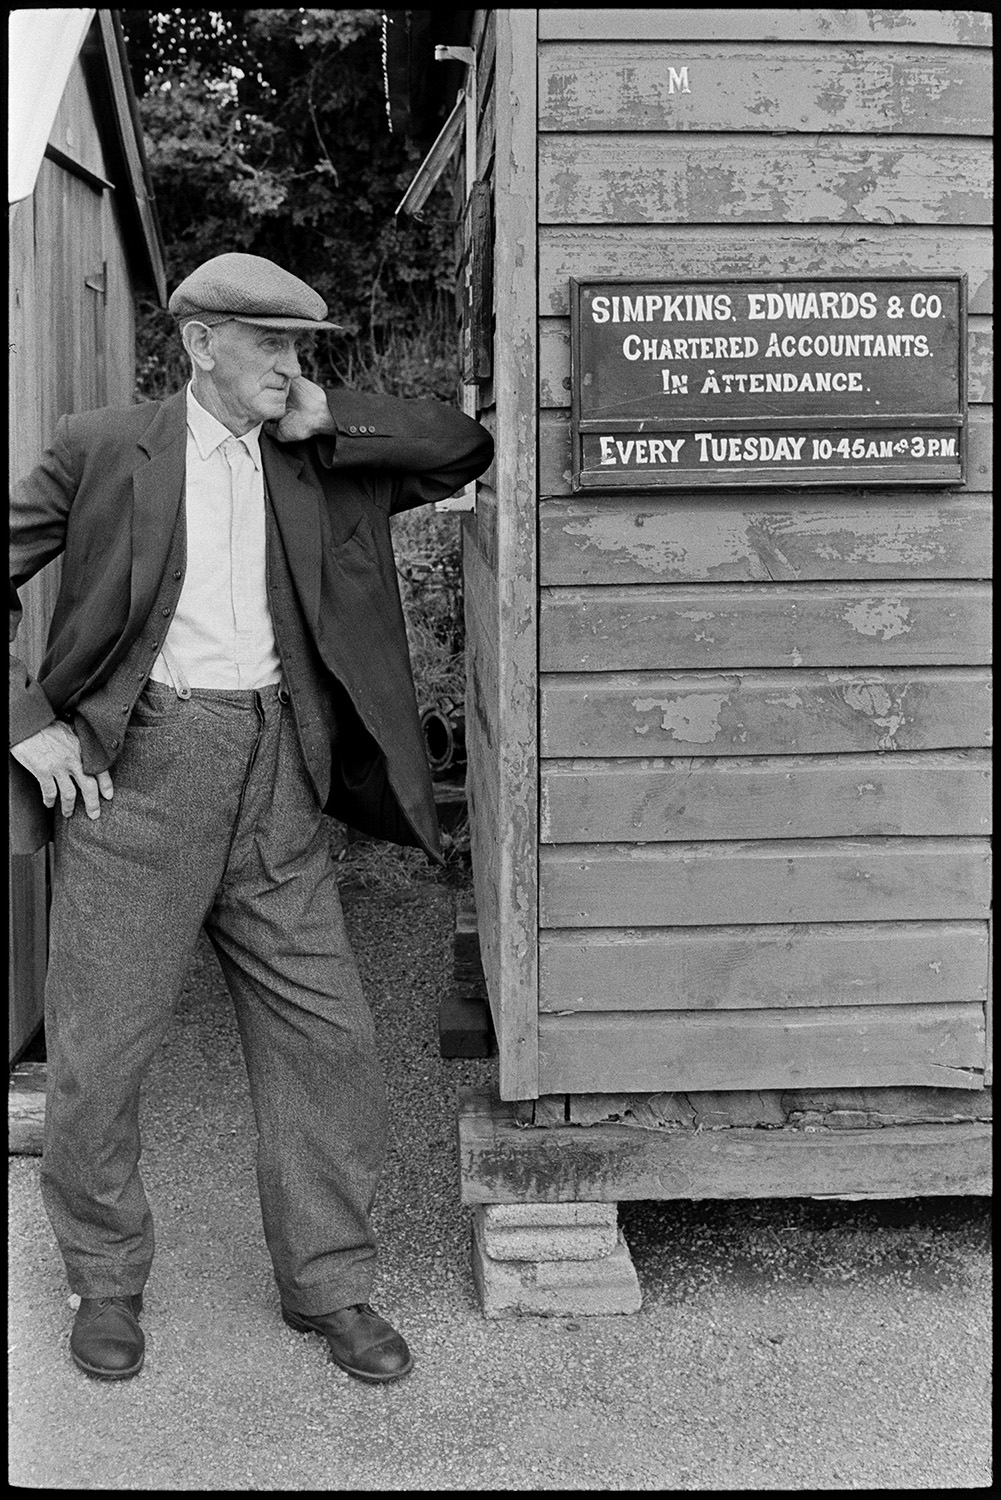 People around on market day, clothes.
[A man wearing a flat cap leaning against a wooden shed at Hatherleigh Market. A sign on the shed reads 'Simpkins, Edward & Co. Chartered Accountants. In Attendance Every Tuesday 10-45AM to 3PM.'.]